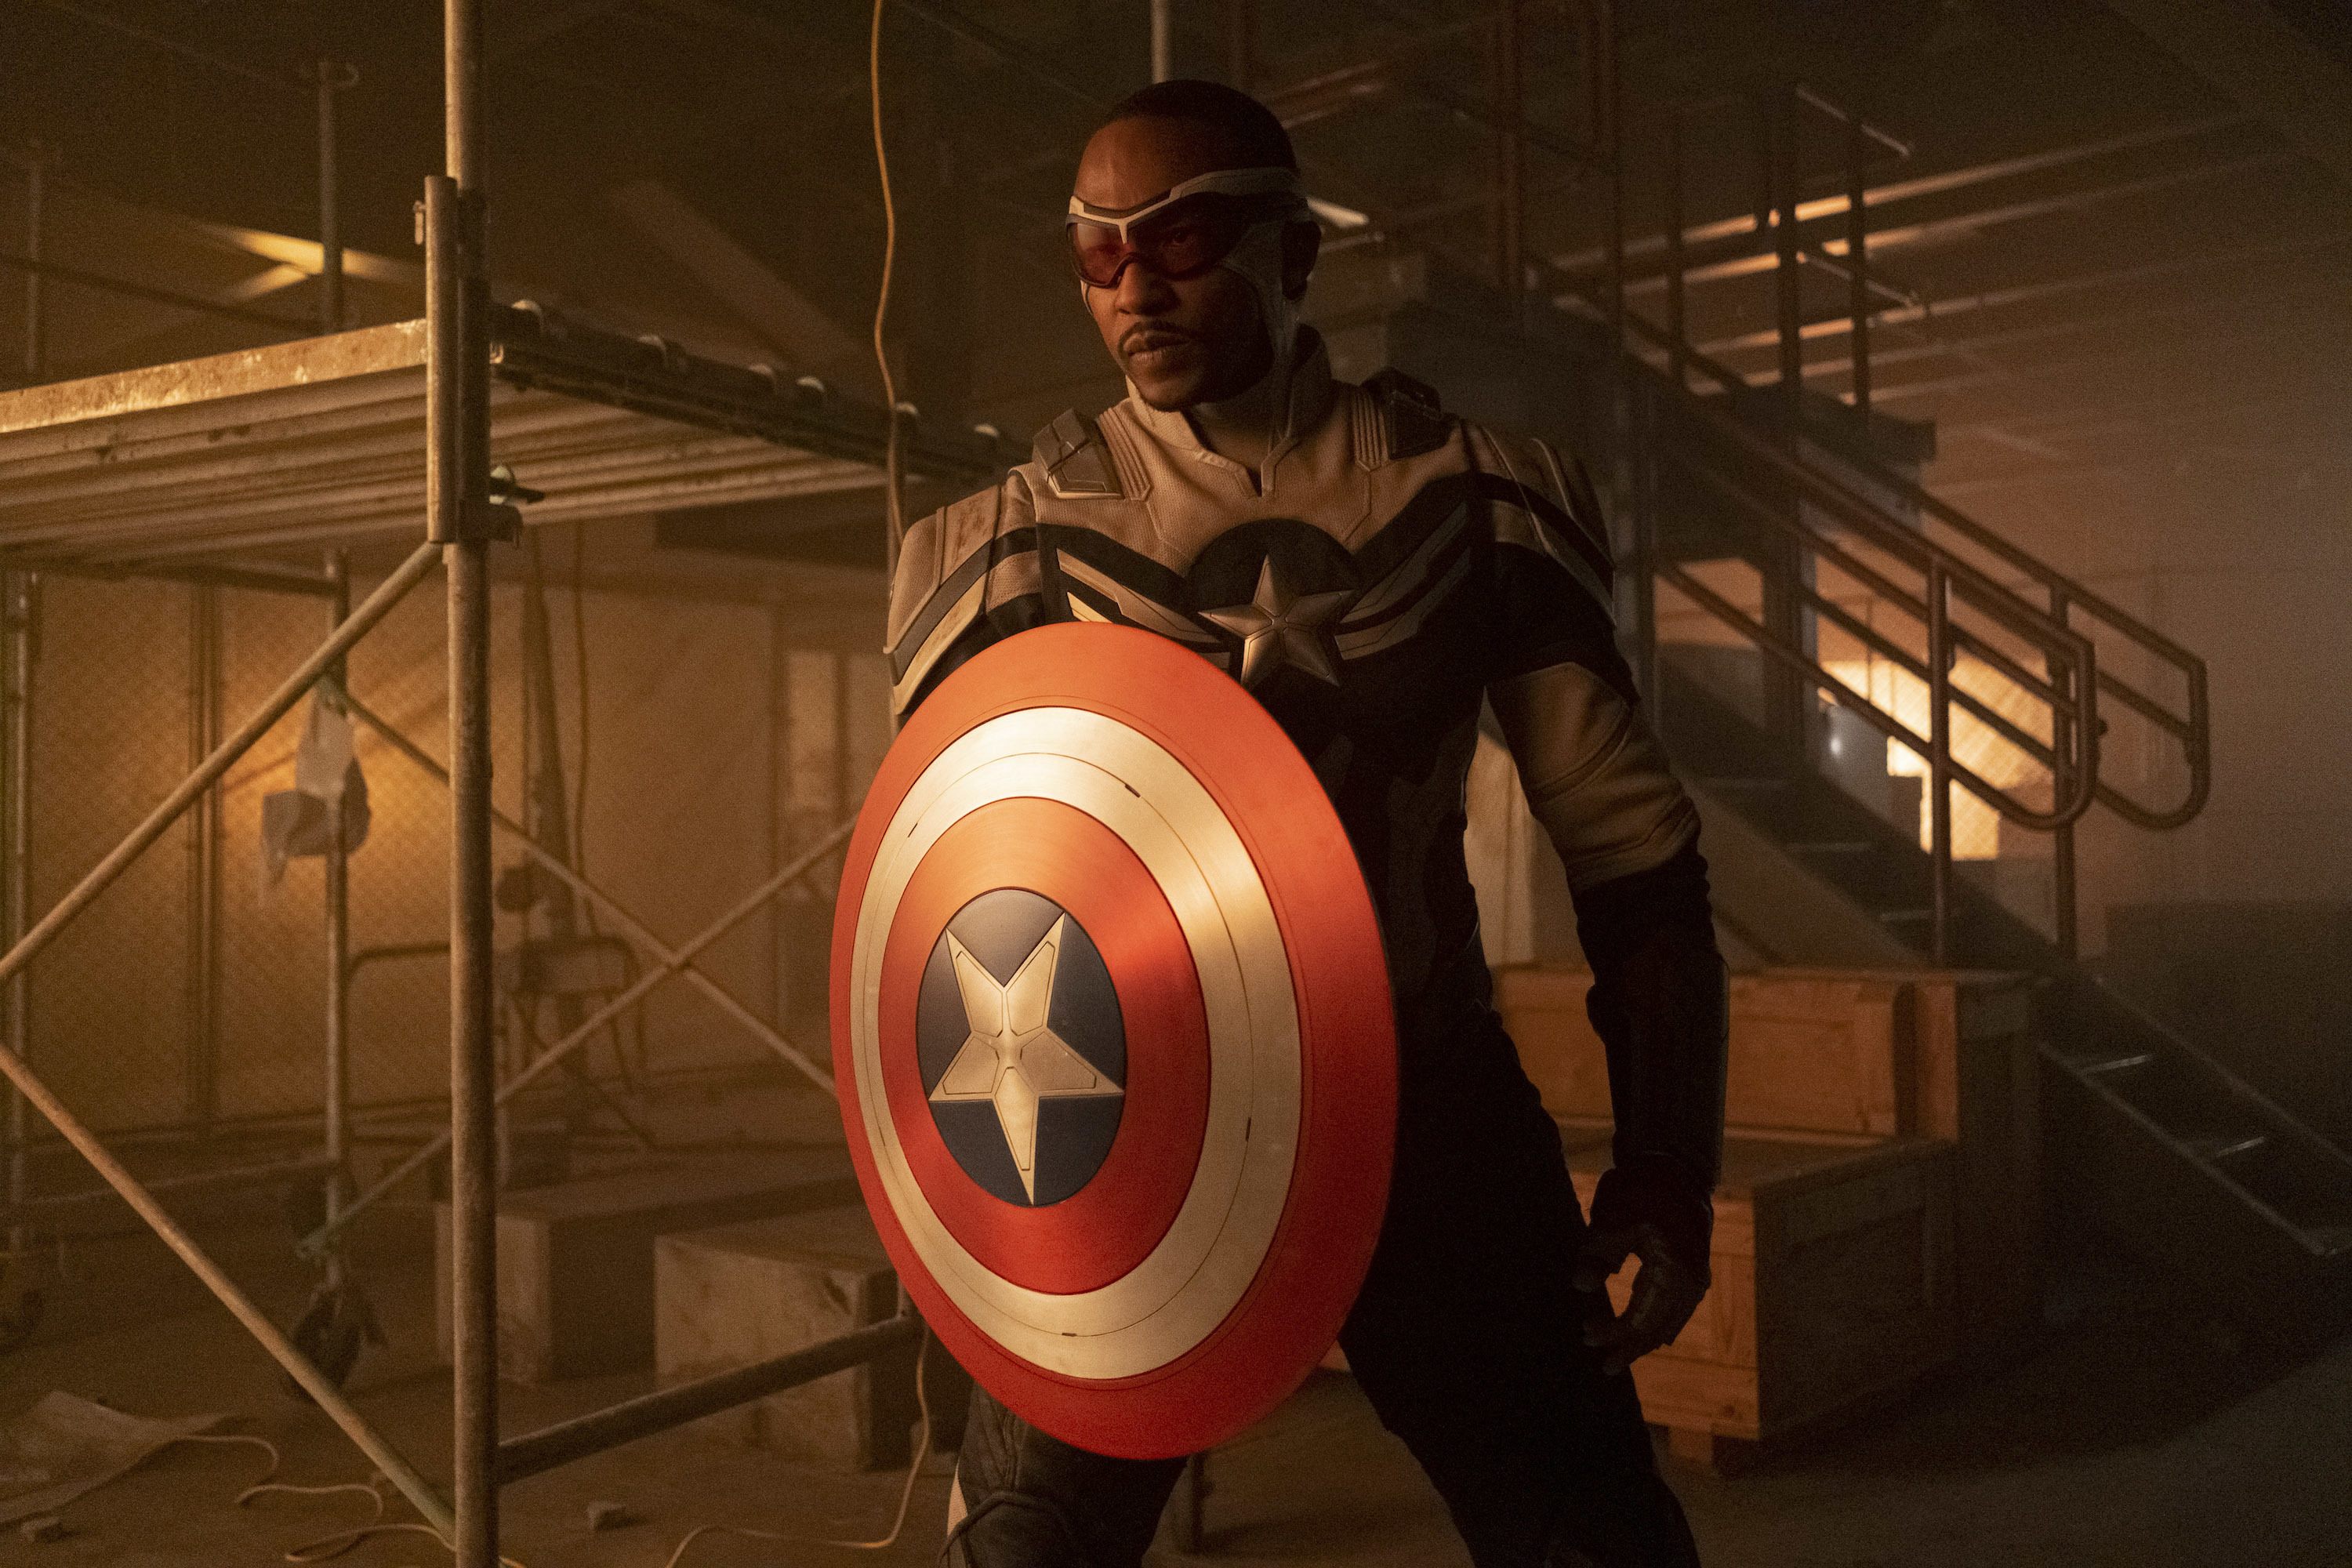 Anthony Mackie as Sam Wilson in 'The Falcon and the Winter Soldier.' He's dressed in his Captain America suit and holding the shield.